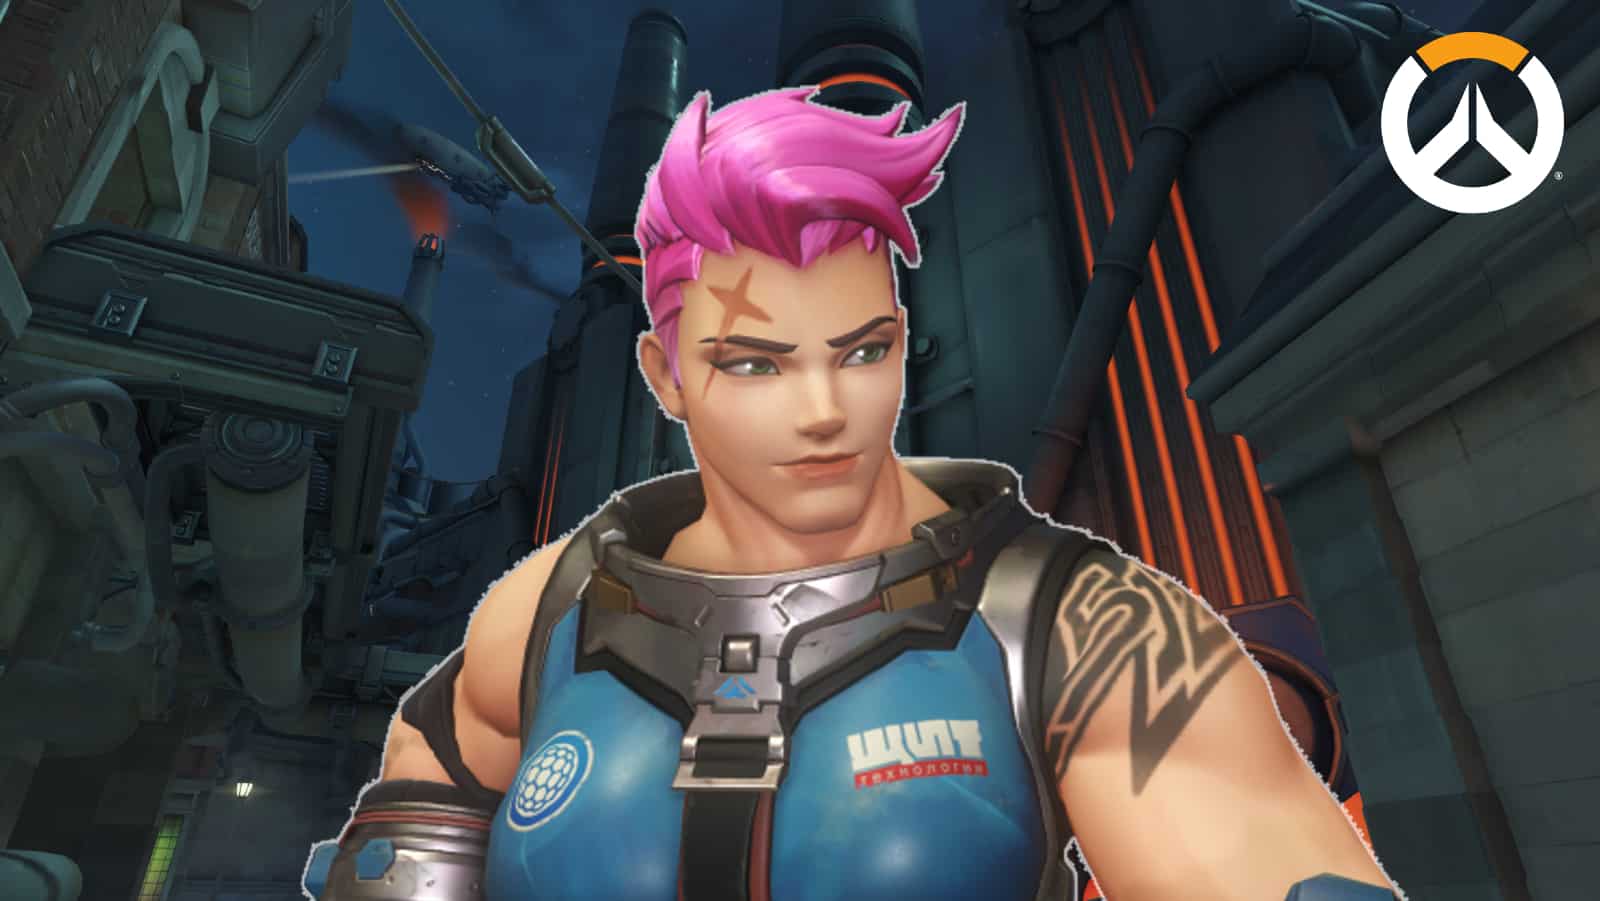 Overwatch Zarya stands against king's row background